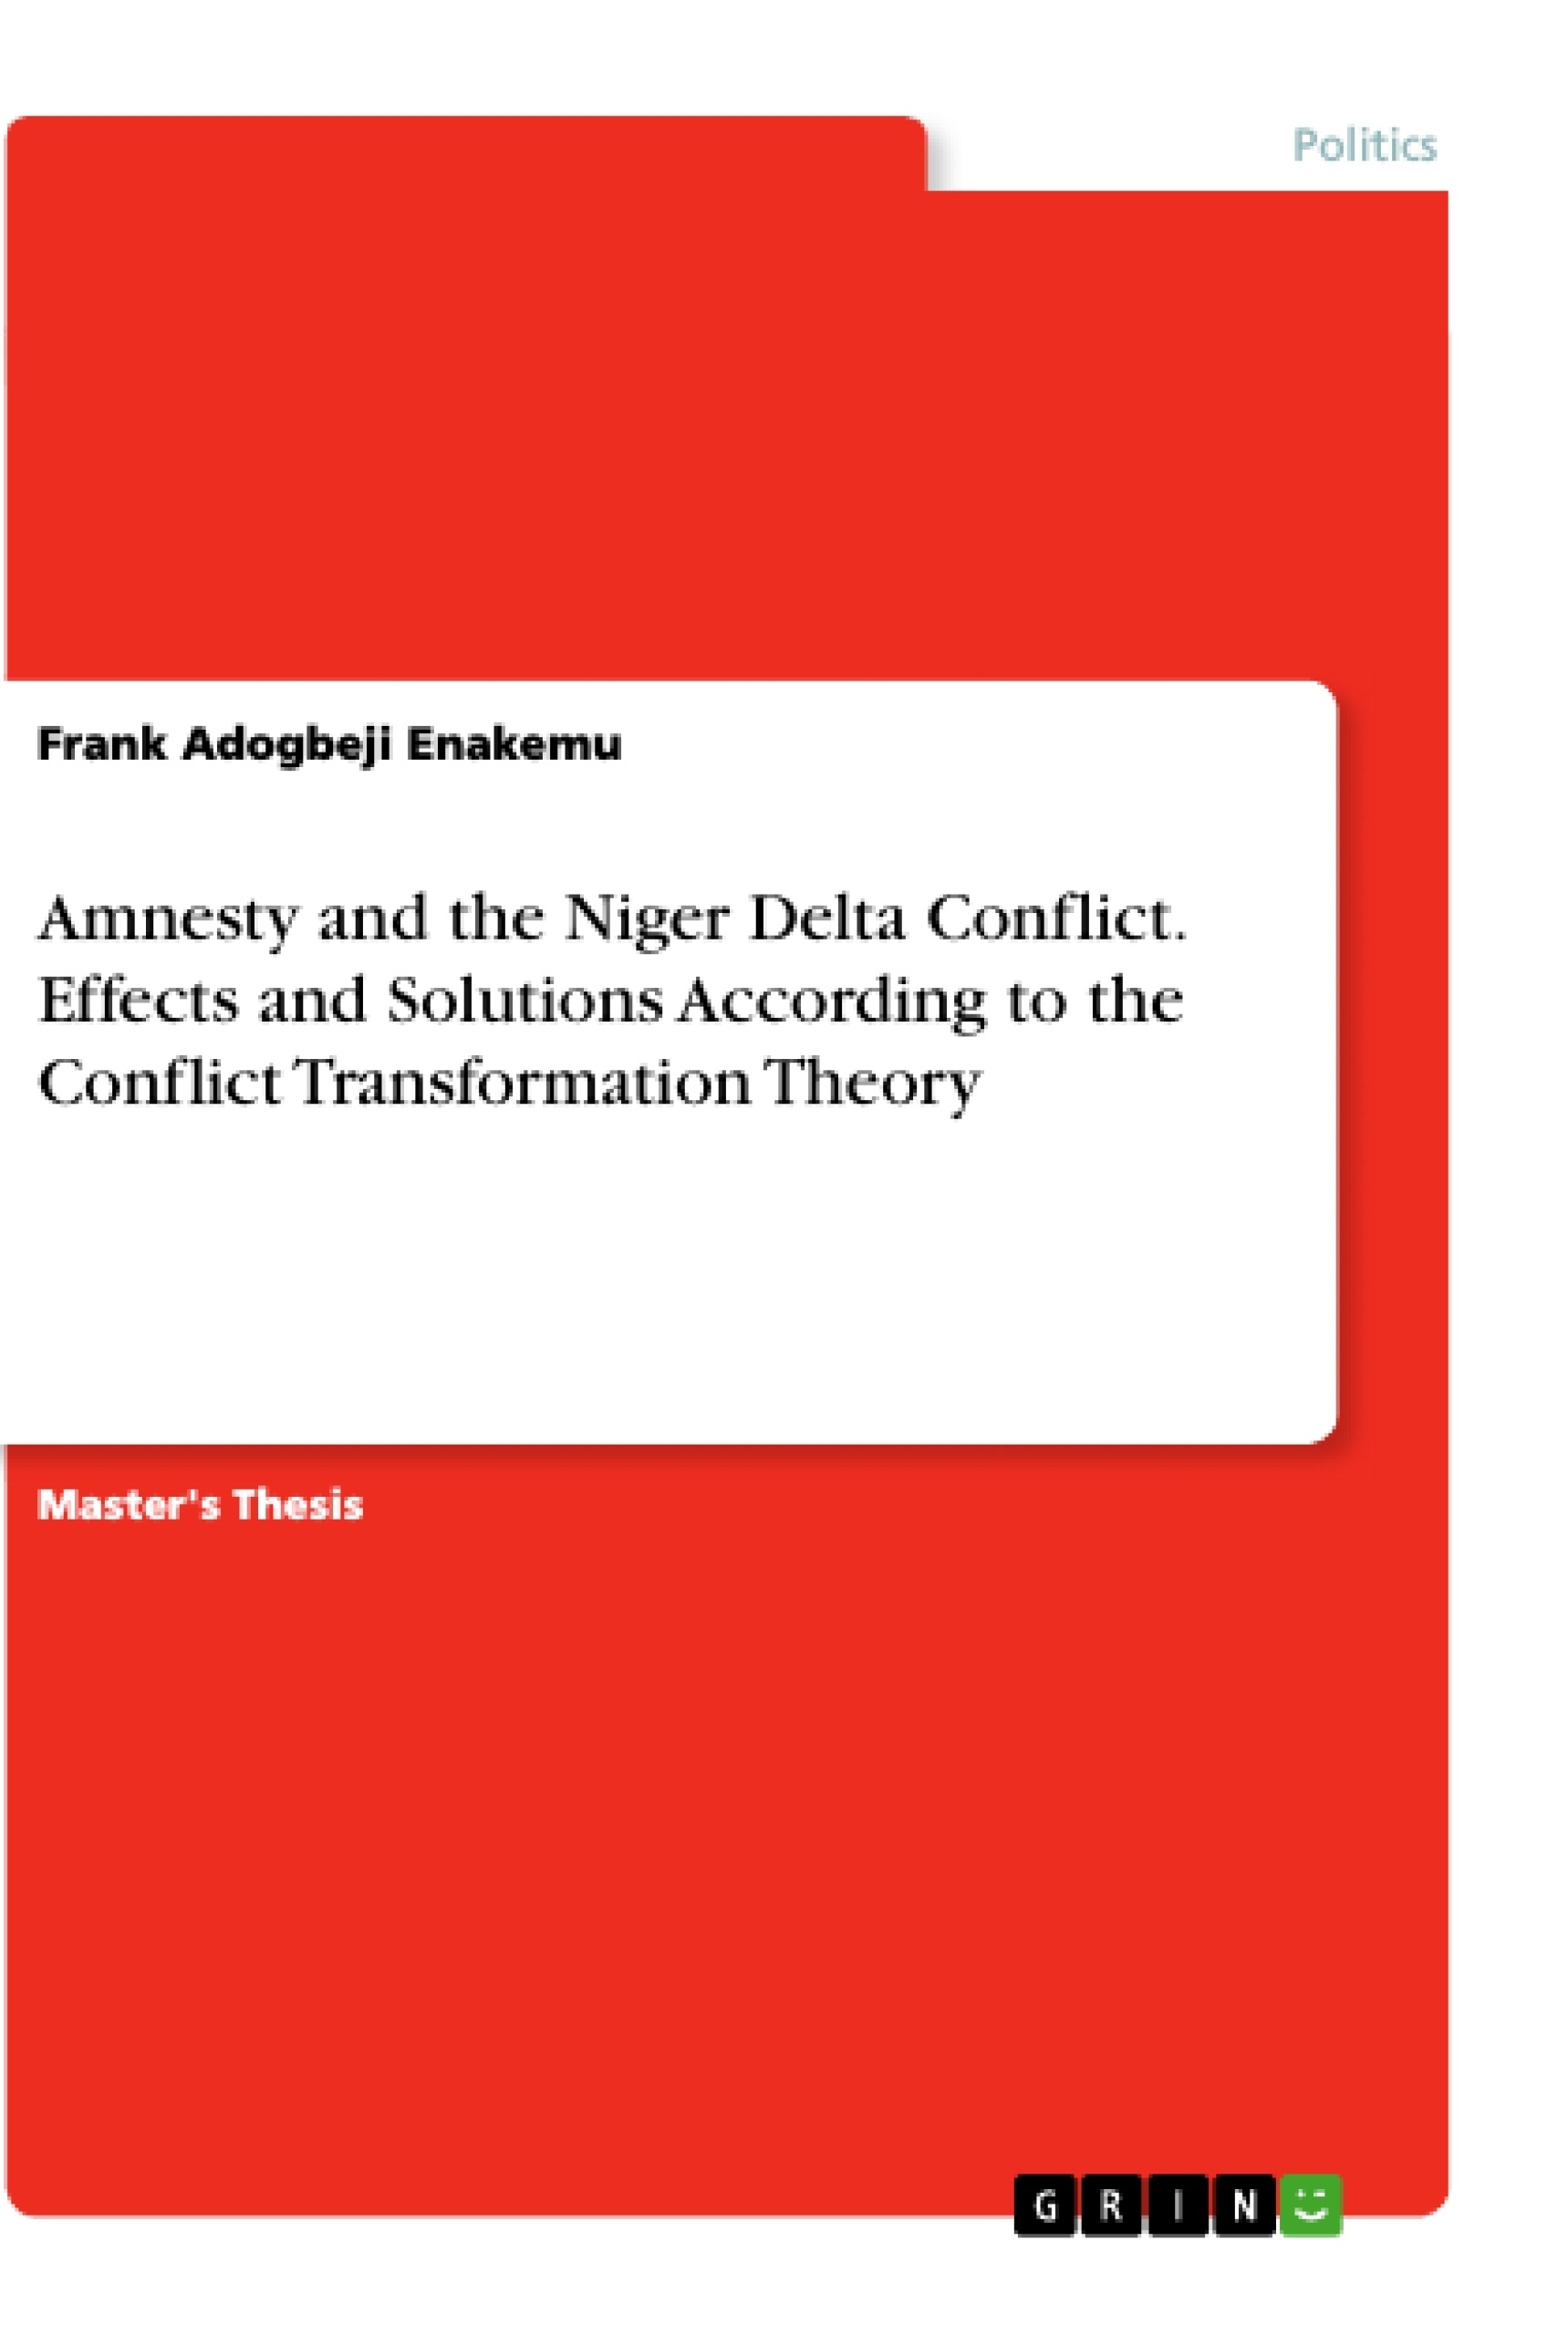 Title: Amnesty and the Niger Delta Conflict. Effects and Solutions According to the Conflict Transformation Theory